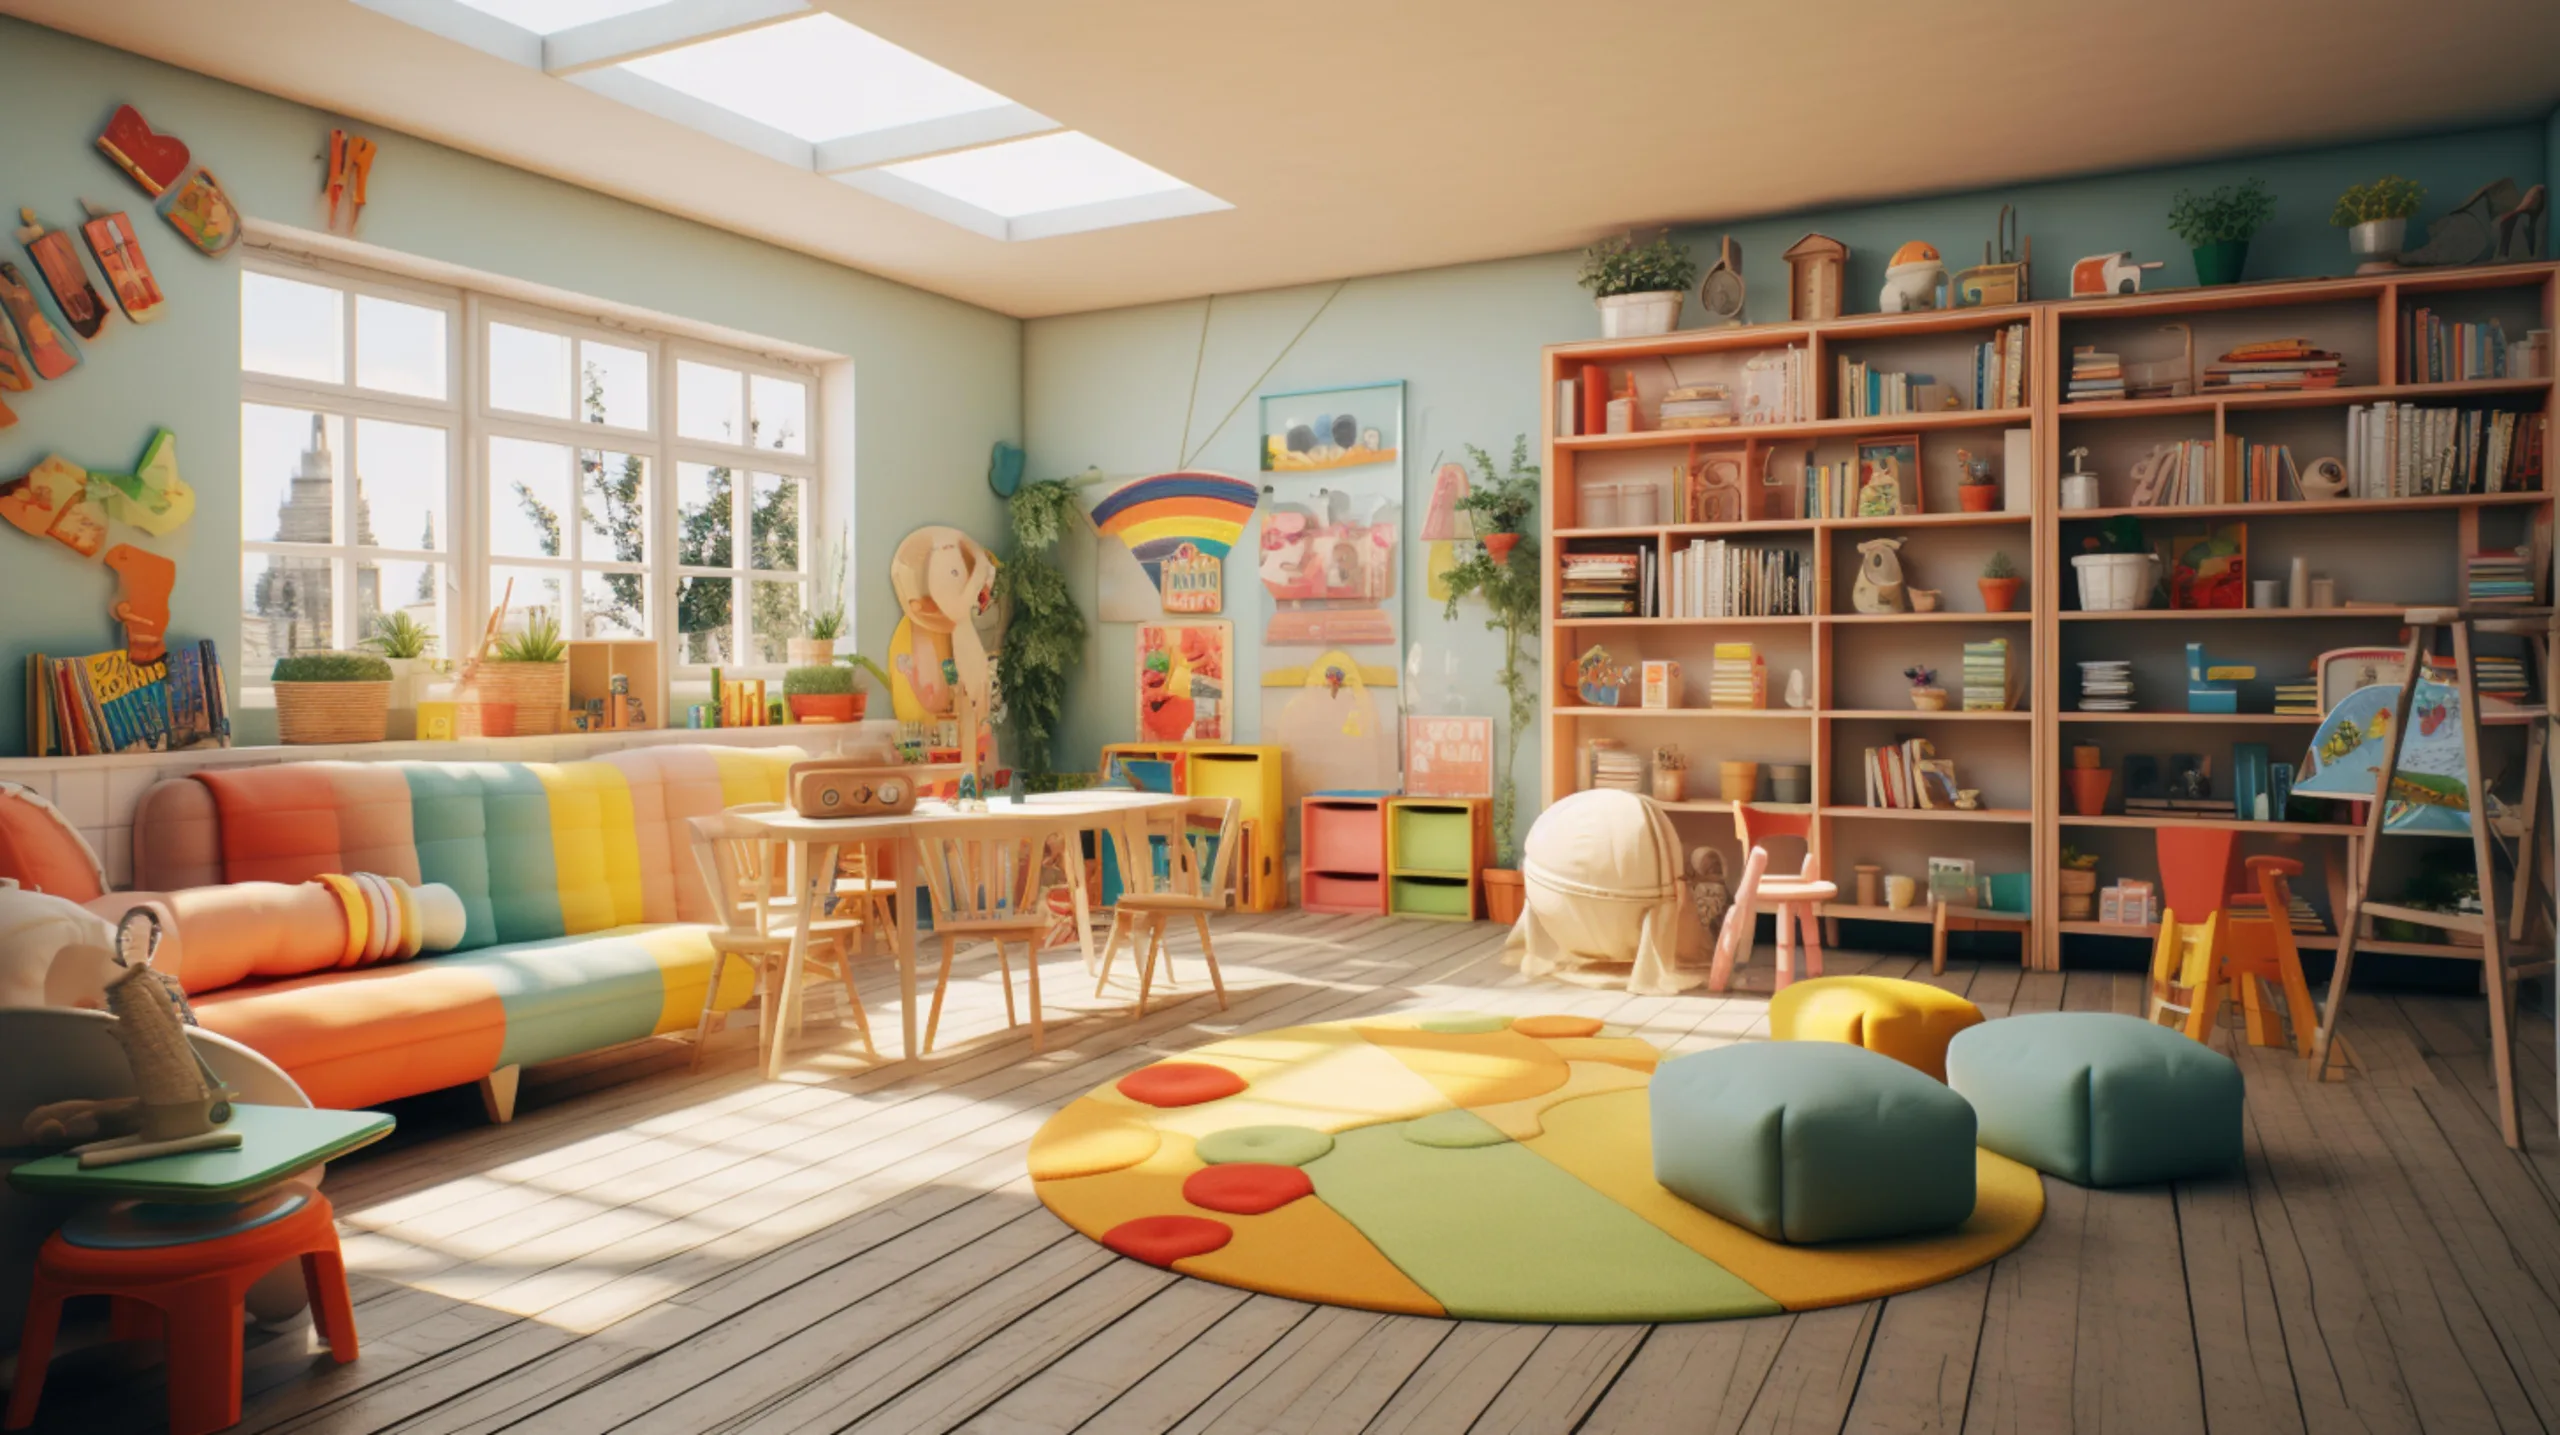 Tips For Furnishing Your Daycare With Kids In Mind